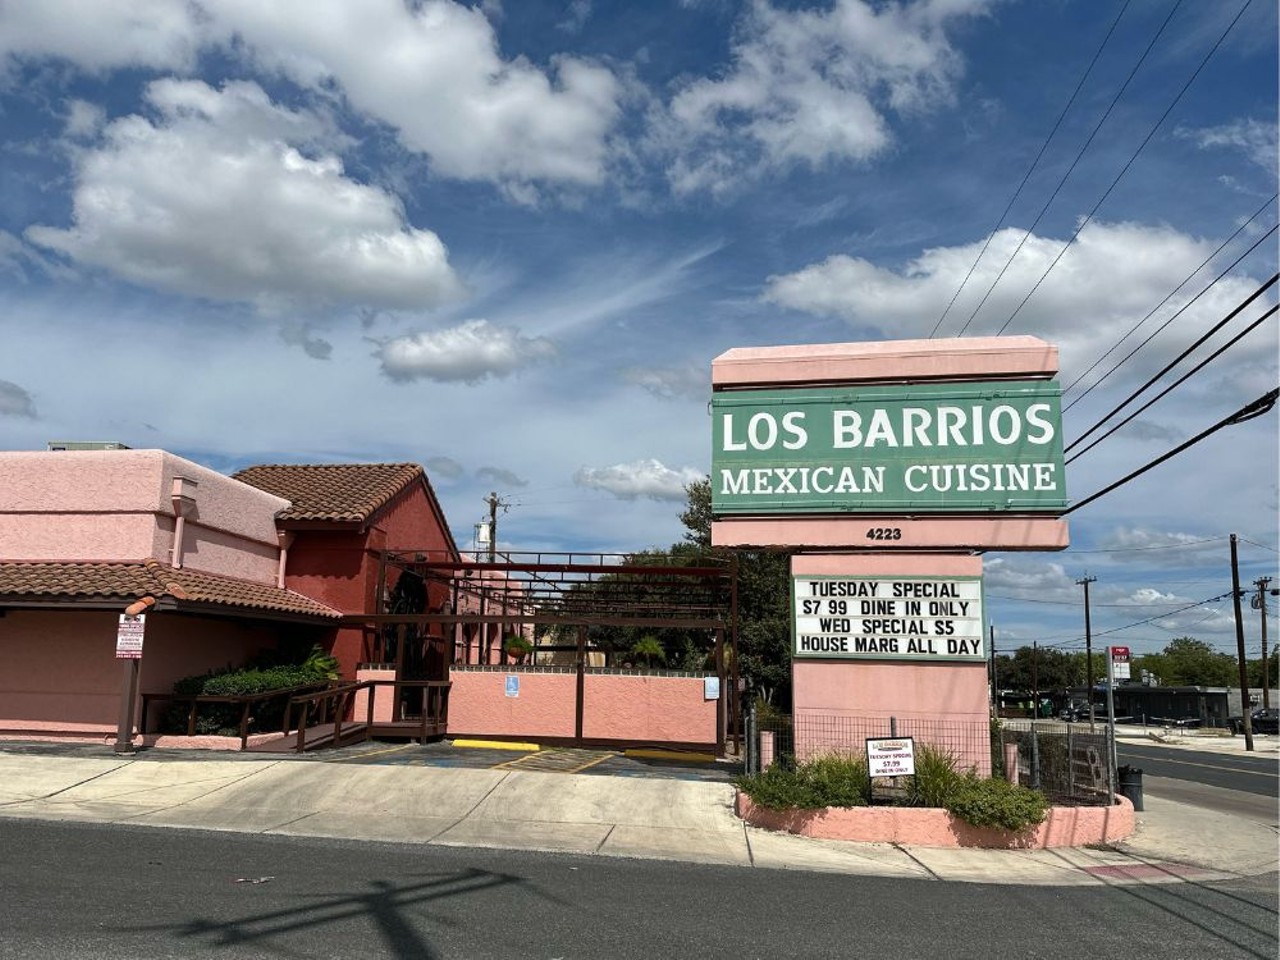 Los Barrios
4223 Blanco Road, (210) 732-6017, losbarriosrestaurant.com
Los Barrios has been delivering "casero-style" meals to the people of San Antonio since 1979 and shows no sign of slowing. Affordable lunch and early bird specials, plus a massive menu of hearty eats have cemented this spot's rep as one of the city's best-loved Mexican restaurants.